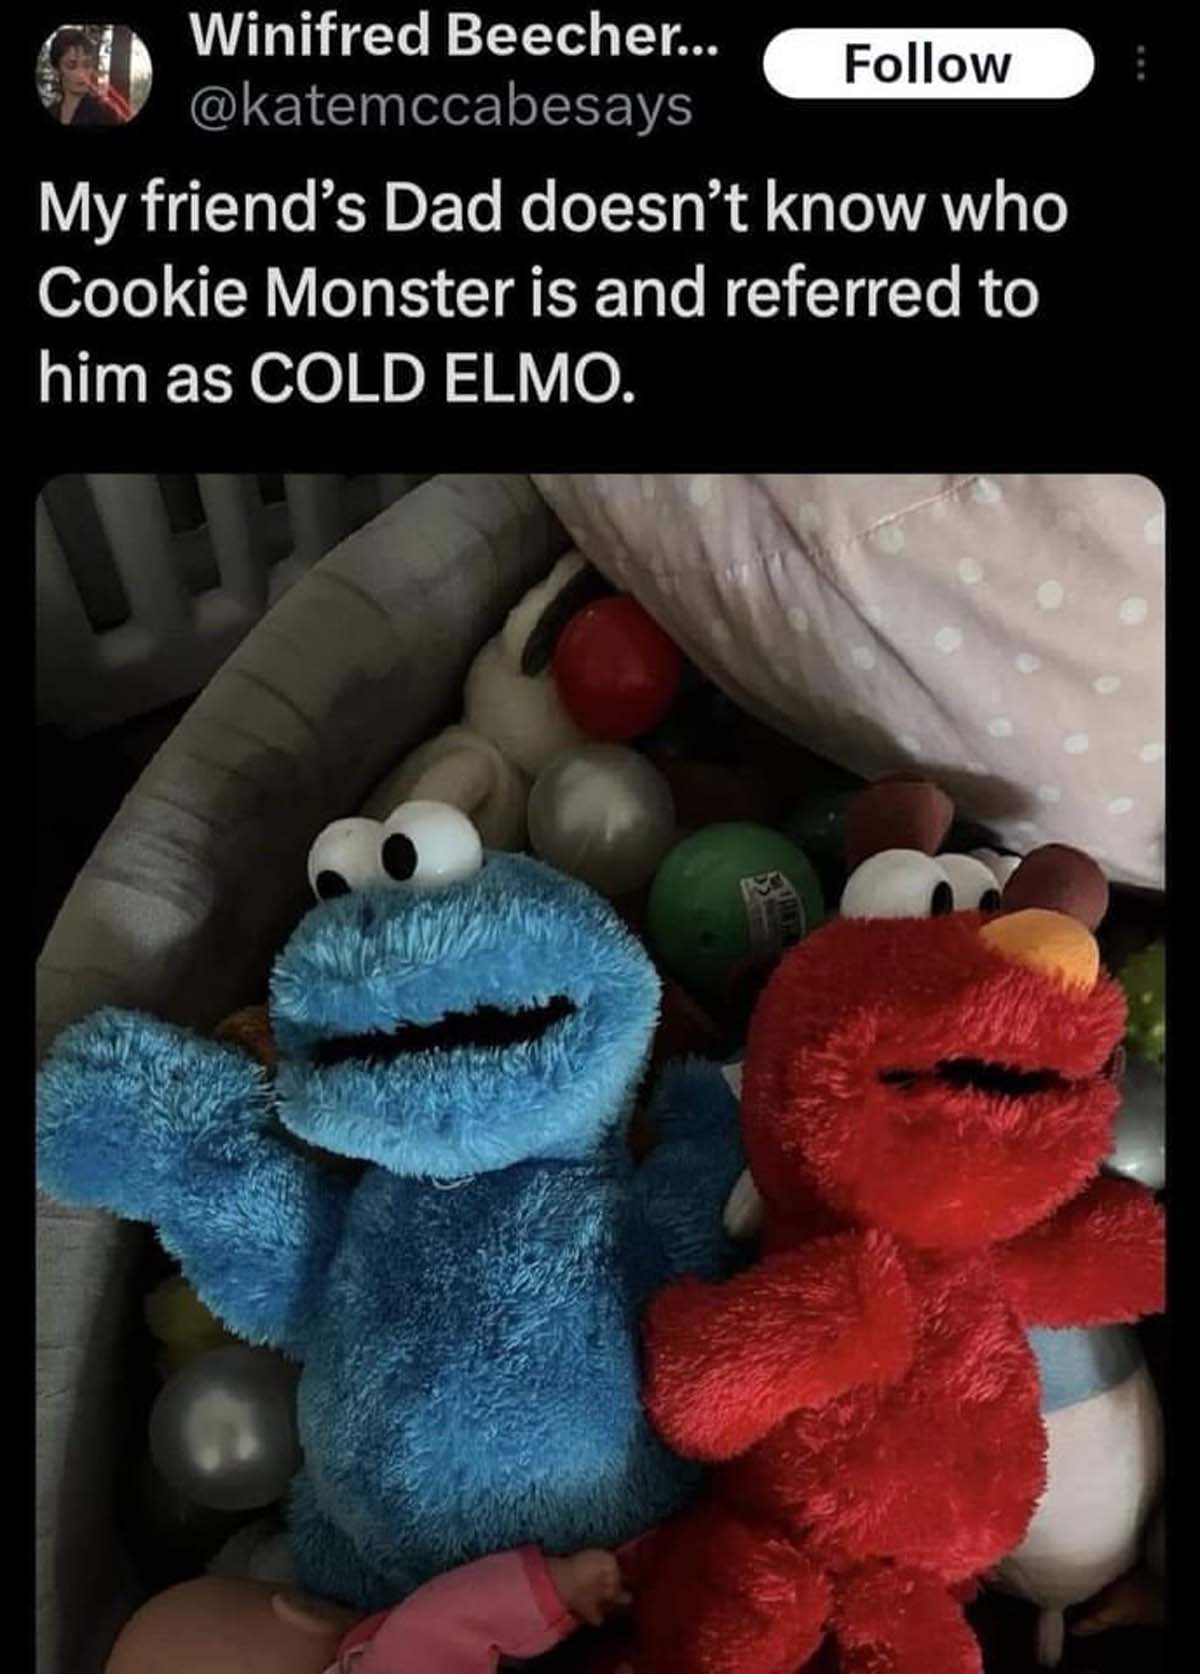 my friends dad doesn t know who cookie monster is - Winifred Beecher... My friend's Dad doesn't know who Cookie Monster is and referred to him as Cold Elmo.